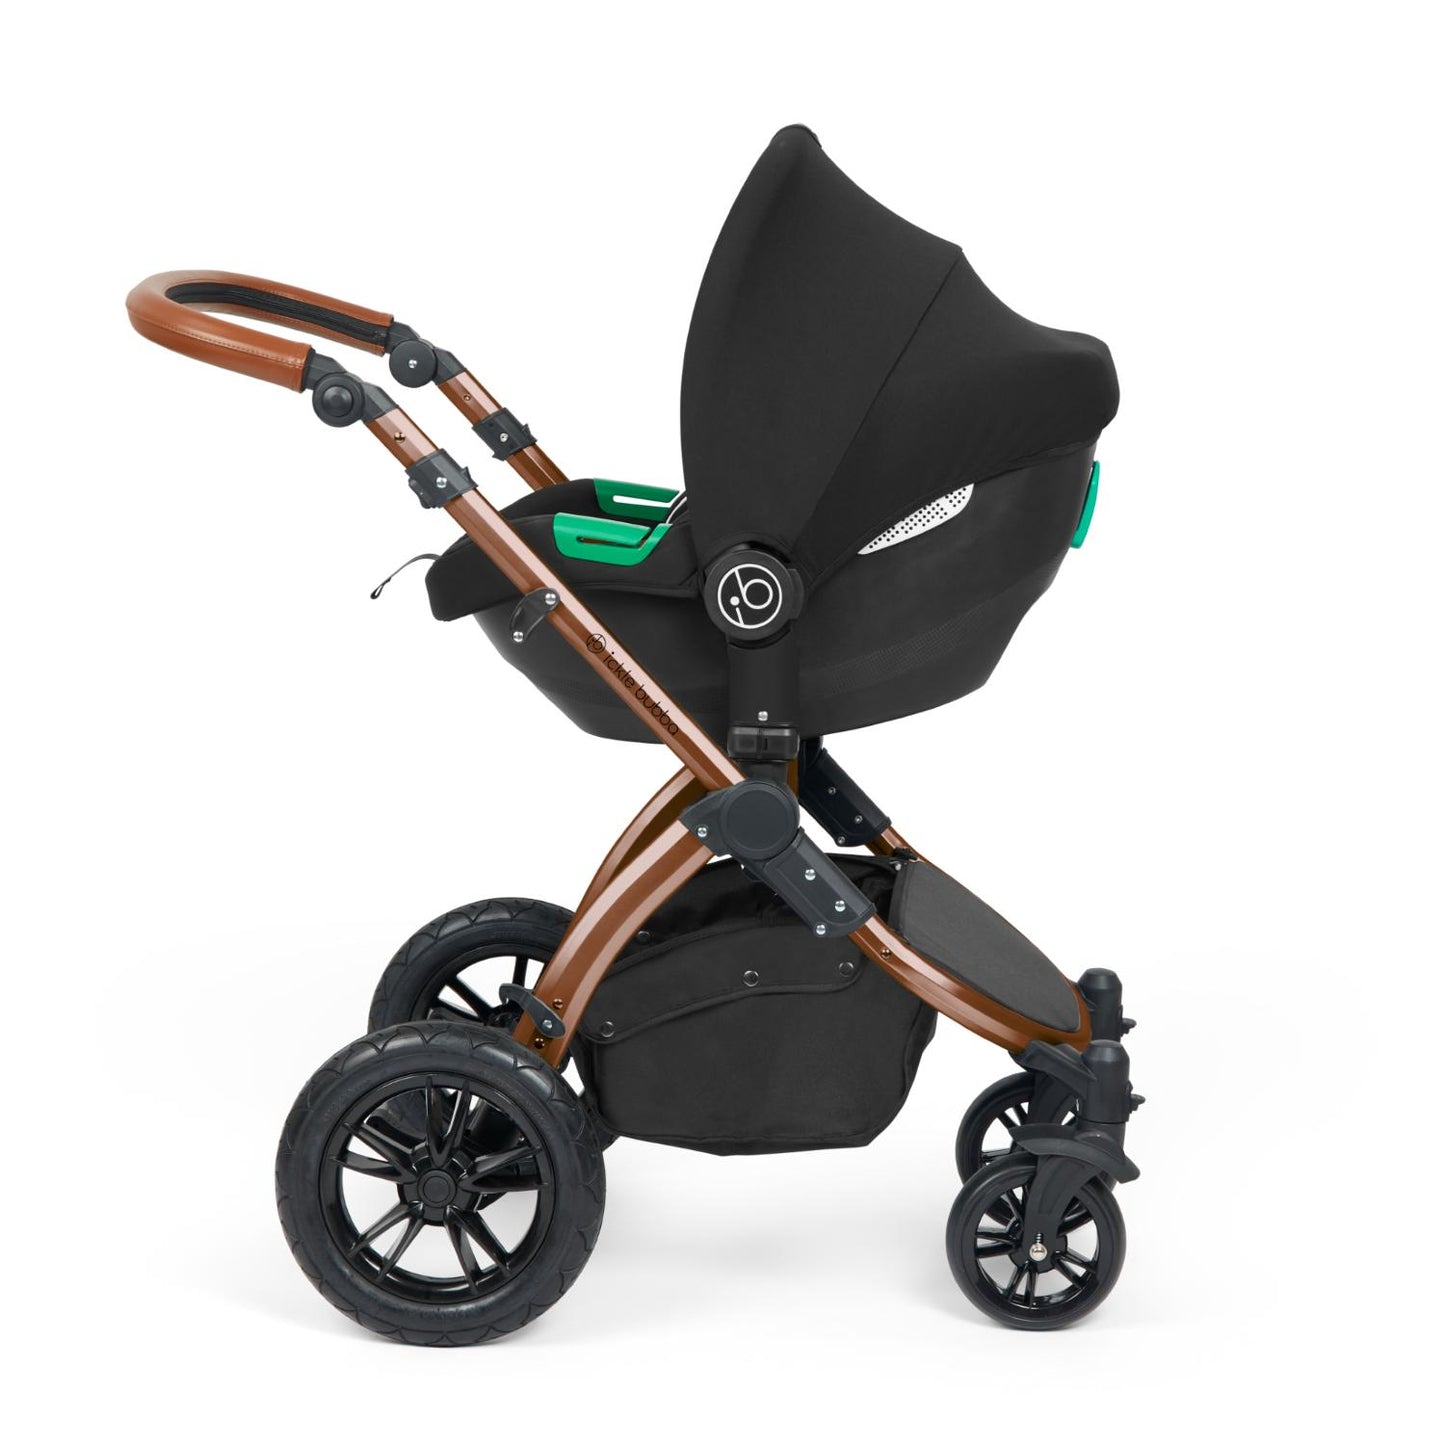 Ickle Bubba Stomp Luxe Pushchair with Cirrus i-Size car seat attached in Woodland green colour with bronze chassis and tan handle